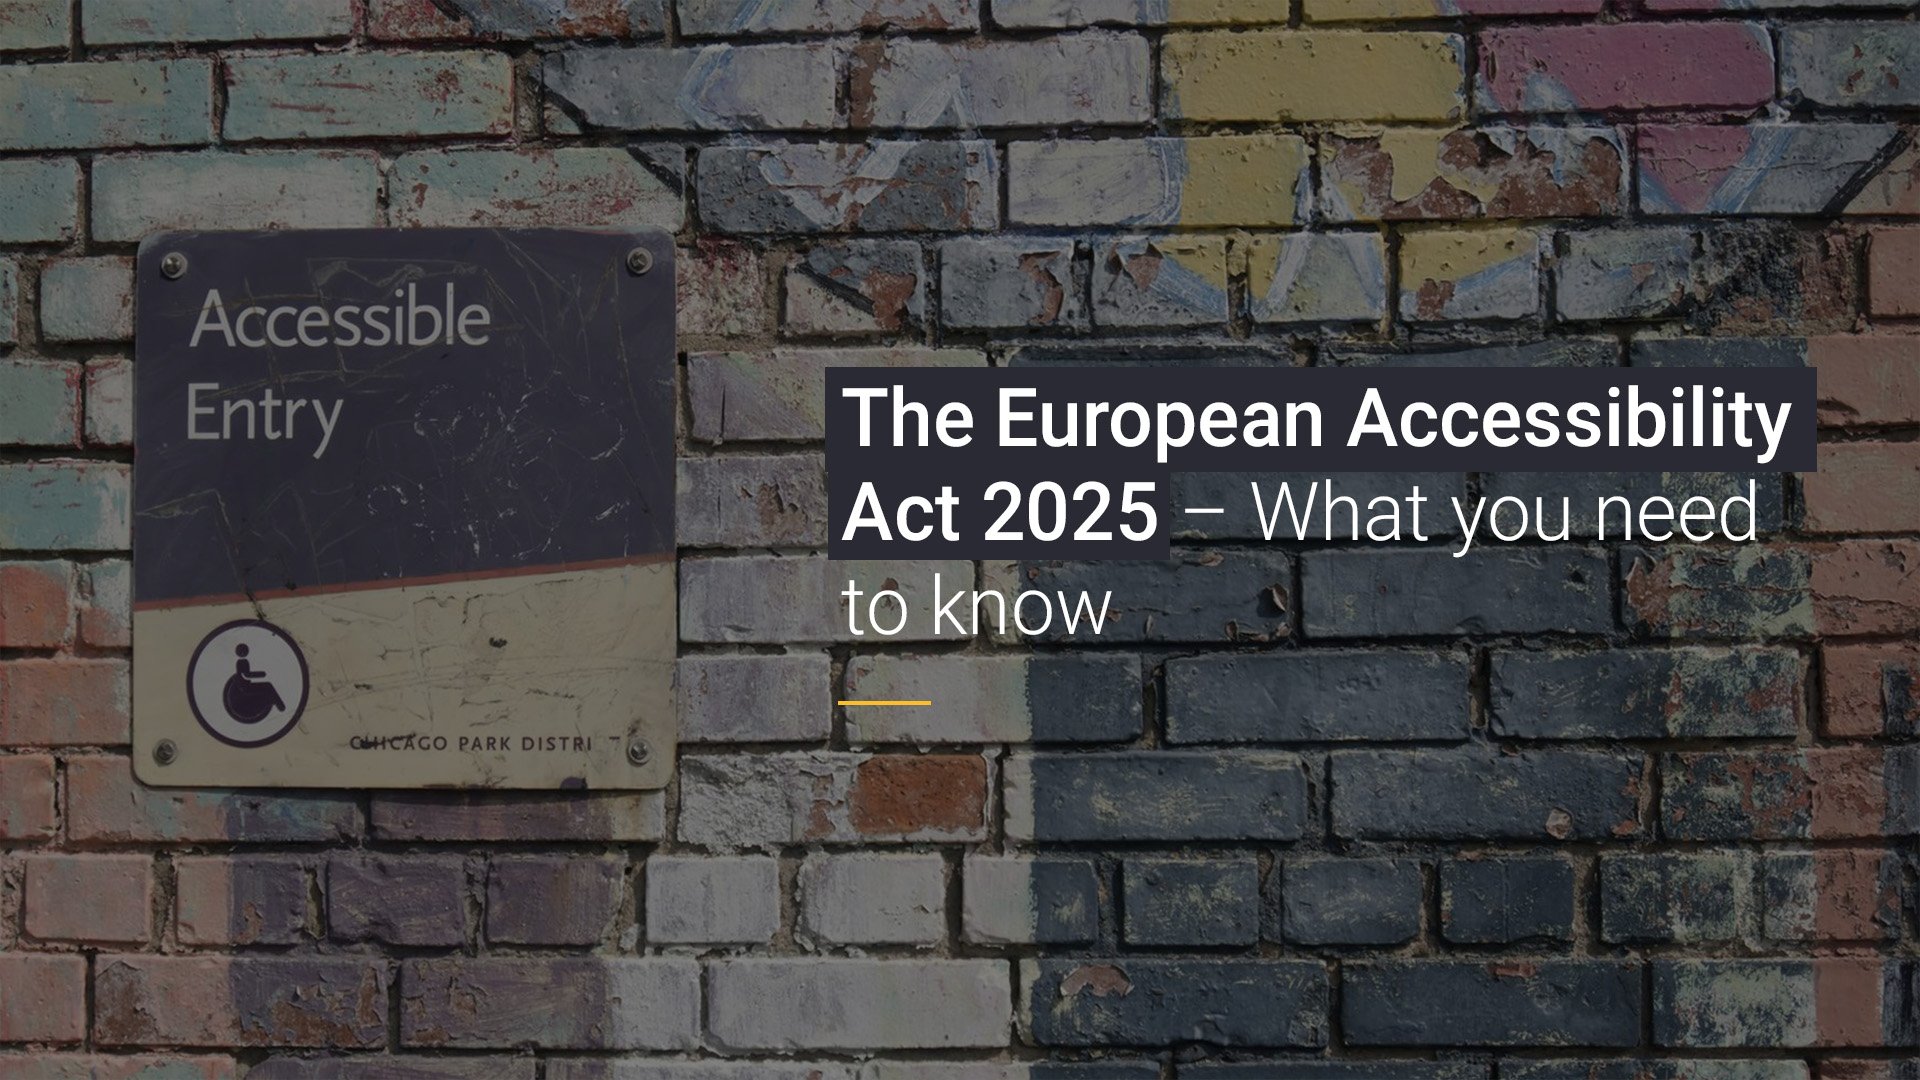 Picture of an accessible entry sign with the text "The European Accessibility Act 2025 – What" on it